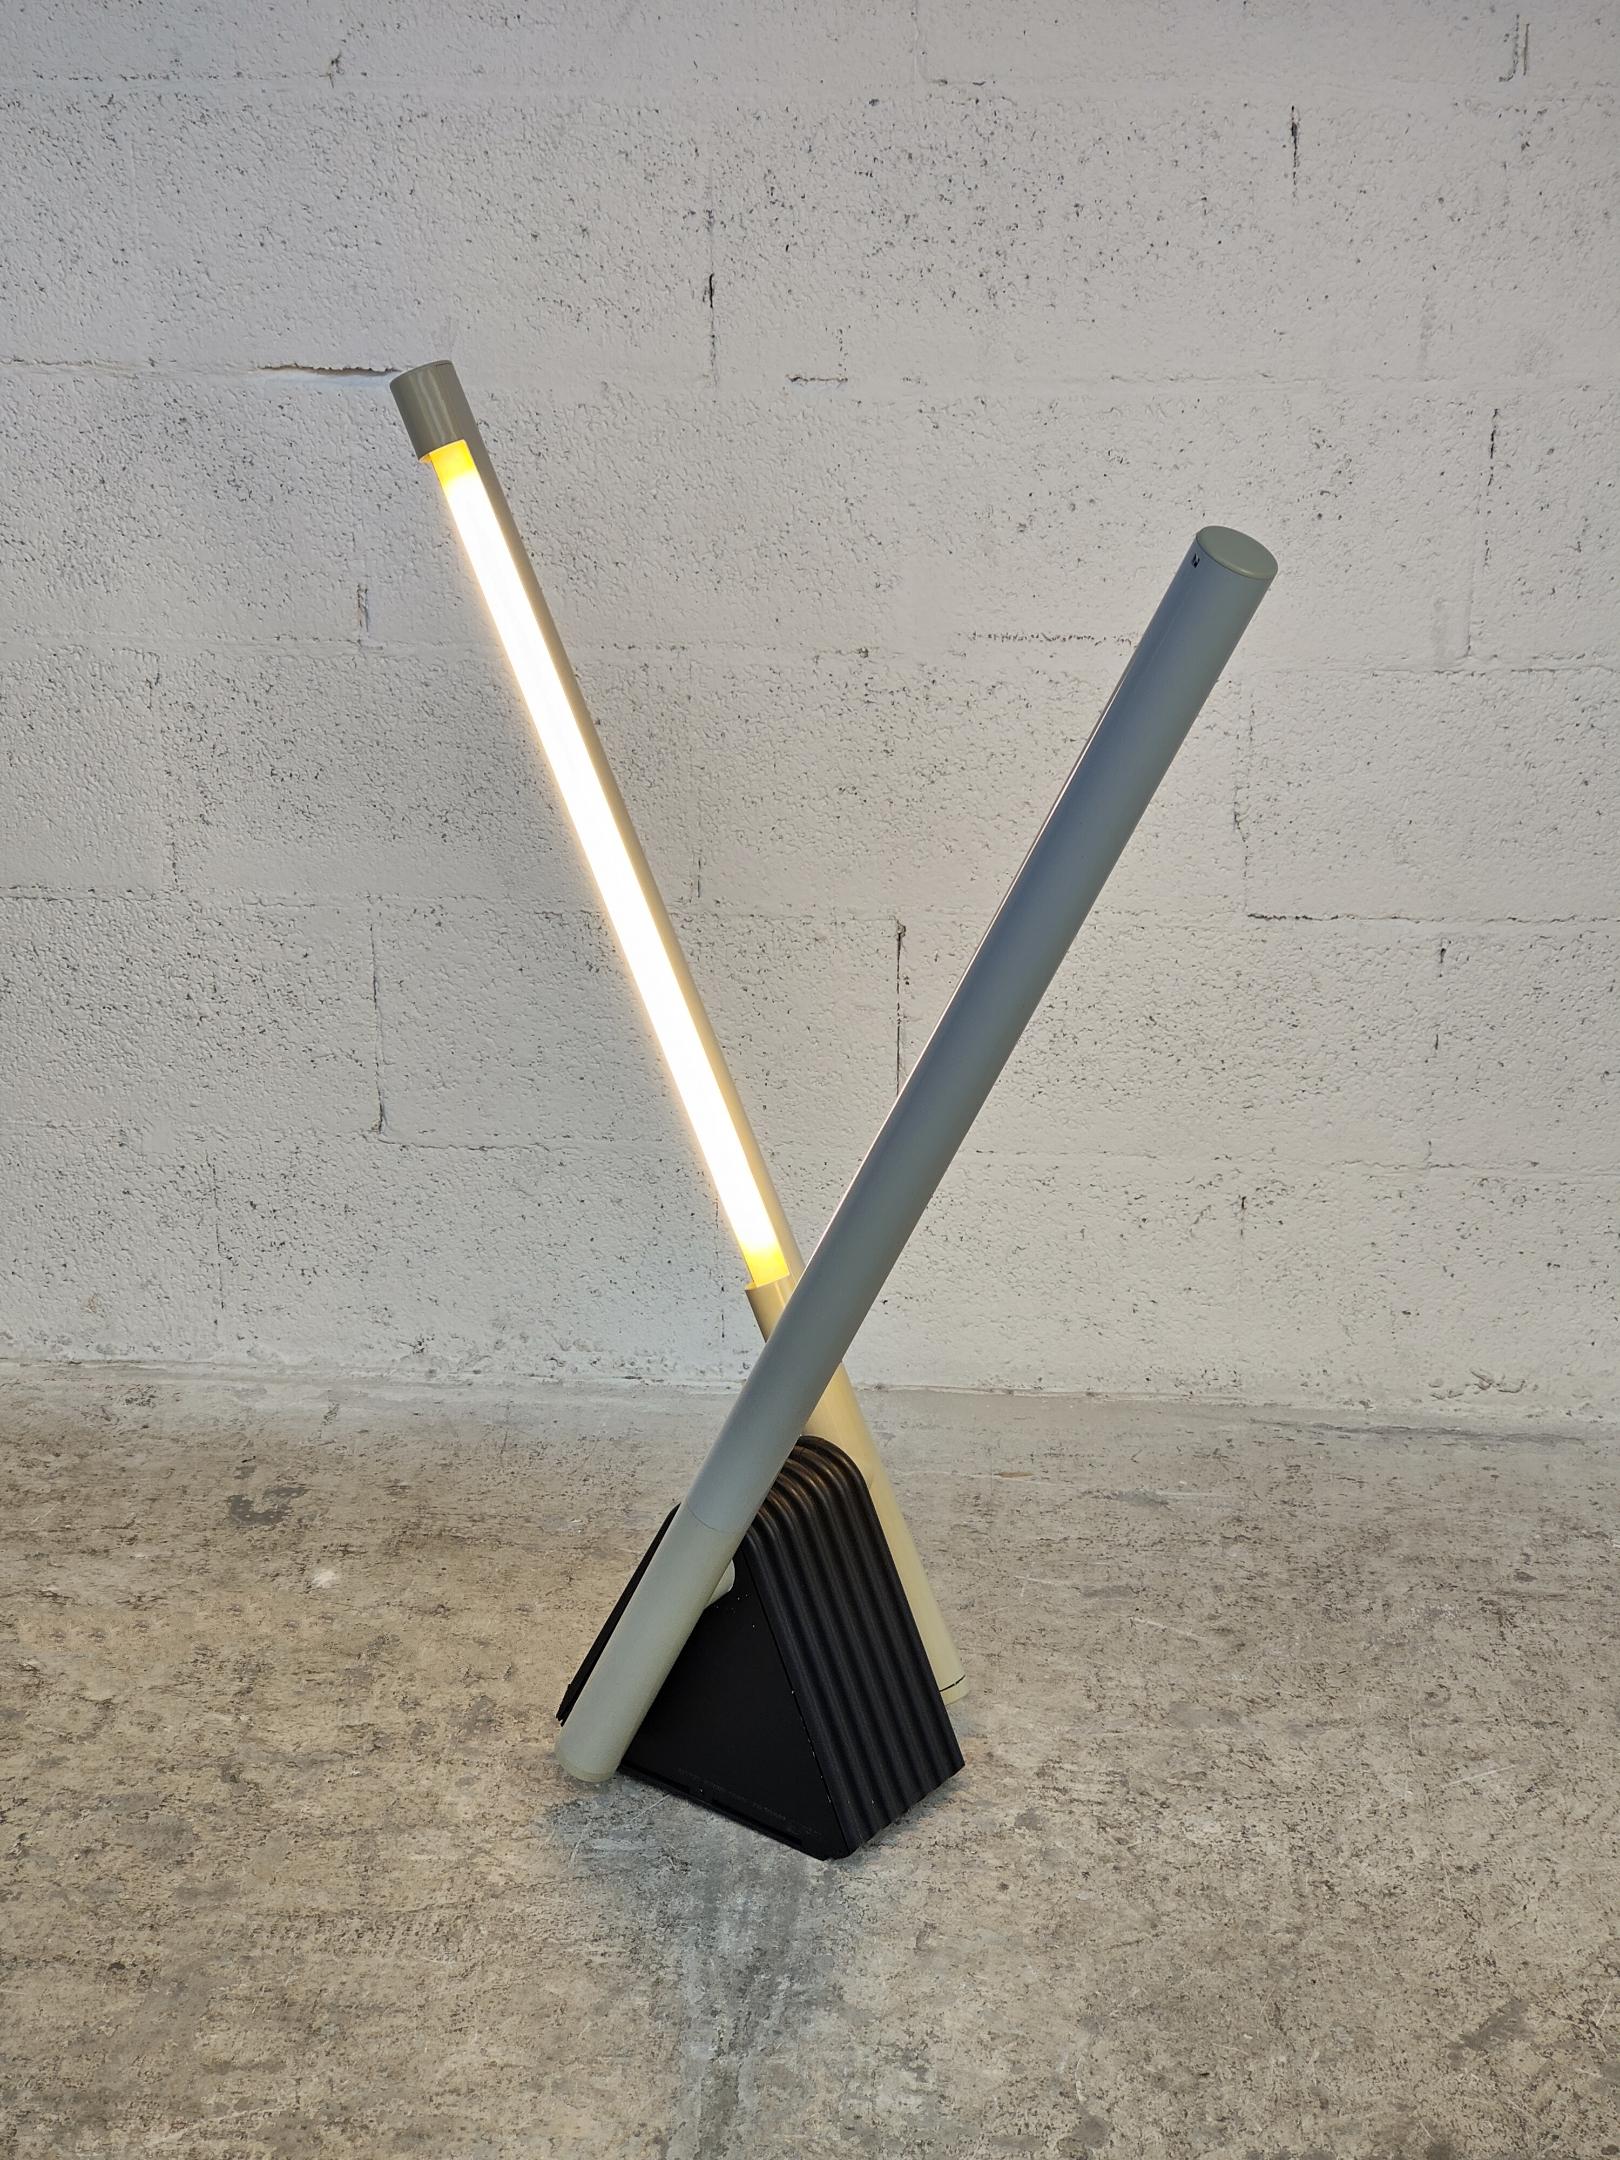 Beautiful adjustable Sistema Flu lamp designed by Rodolfo Bonetto for Luci Italia 1980s. 
This lamp can be used as floor, wall or ceiling lamp. 
It has a black triangular base and two gray adjustable arms.
The arms can rotate to about 180 degrees